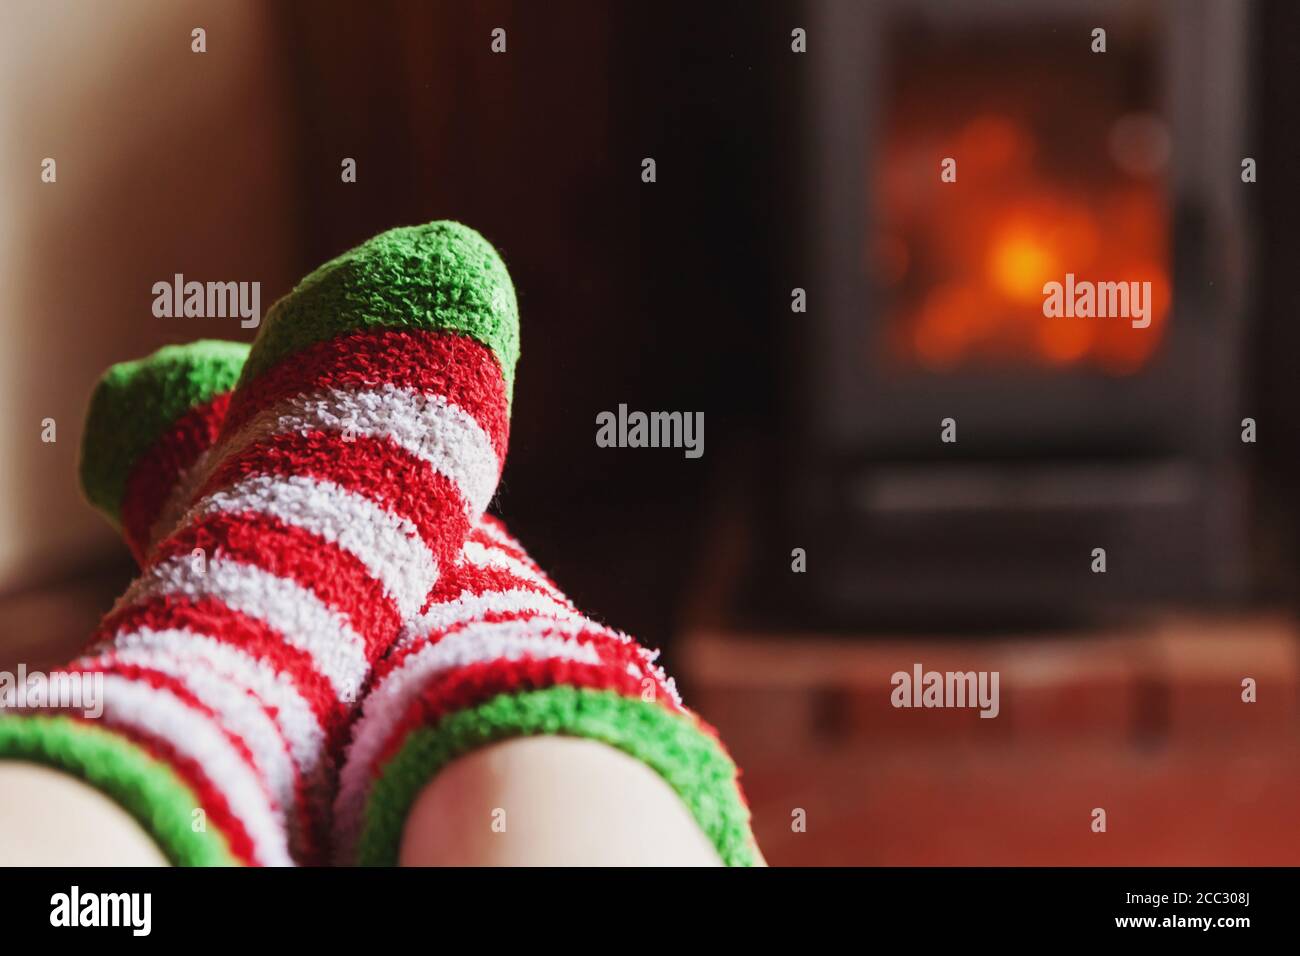 Feet legs in winter clothes wool socks at fireplace background. Woman sitting at home on winter or autumn evening relaxing and warming up. Winter and cold weather concept. Hygge Christmas eve Stock Photo